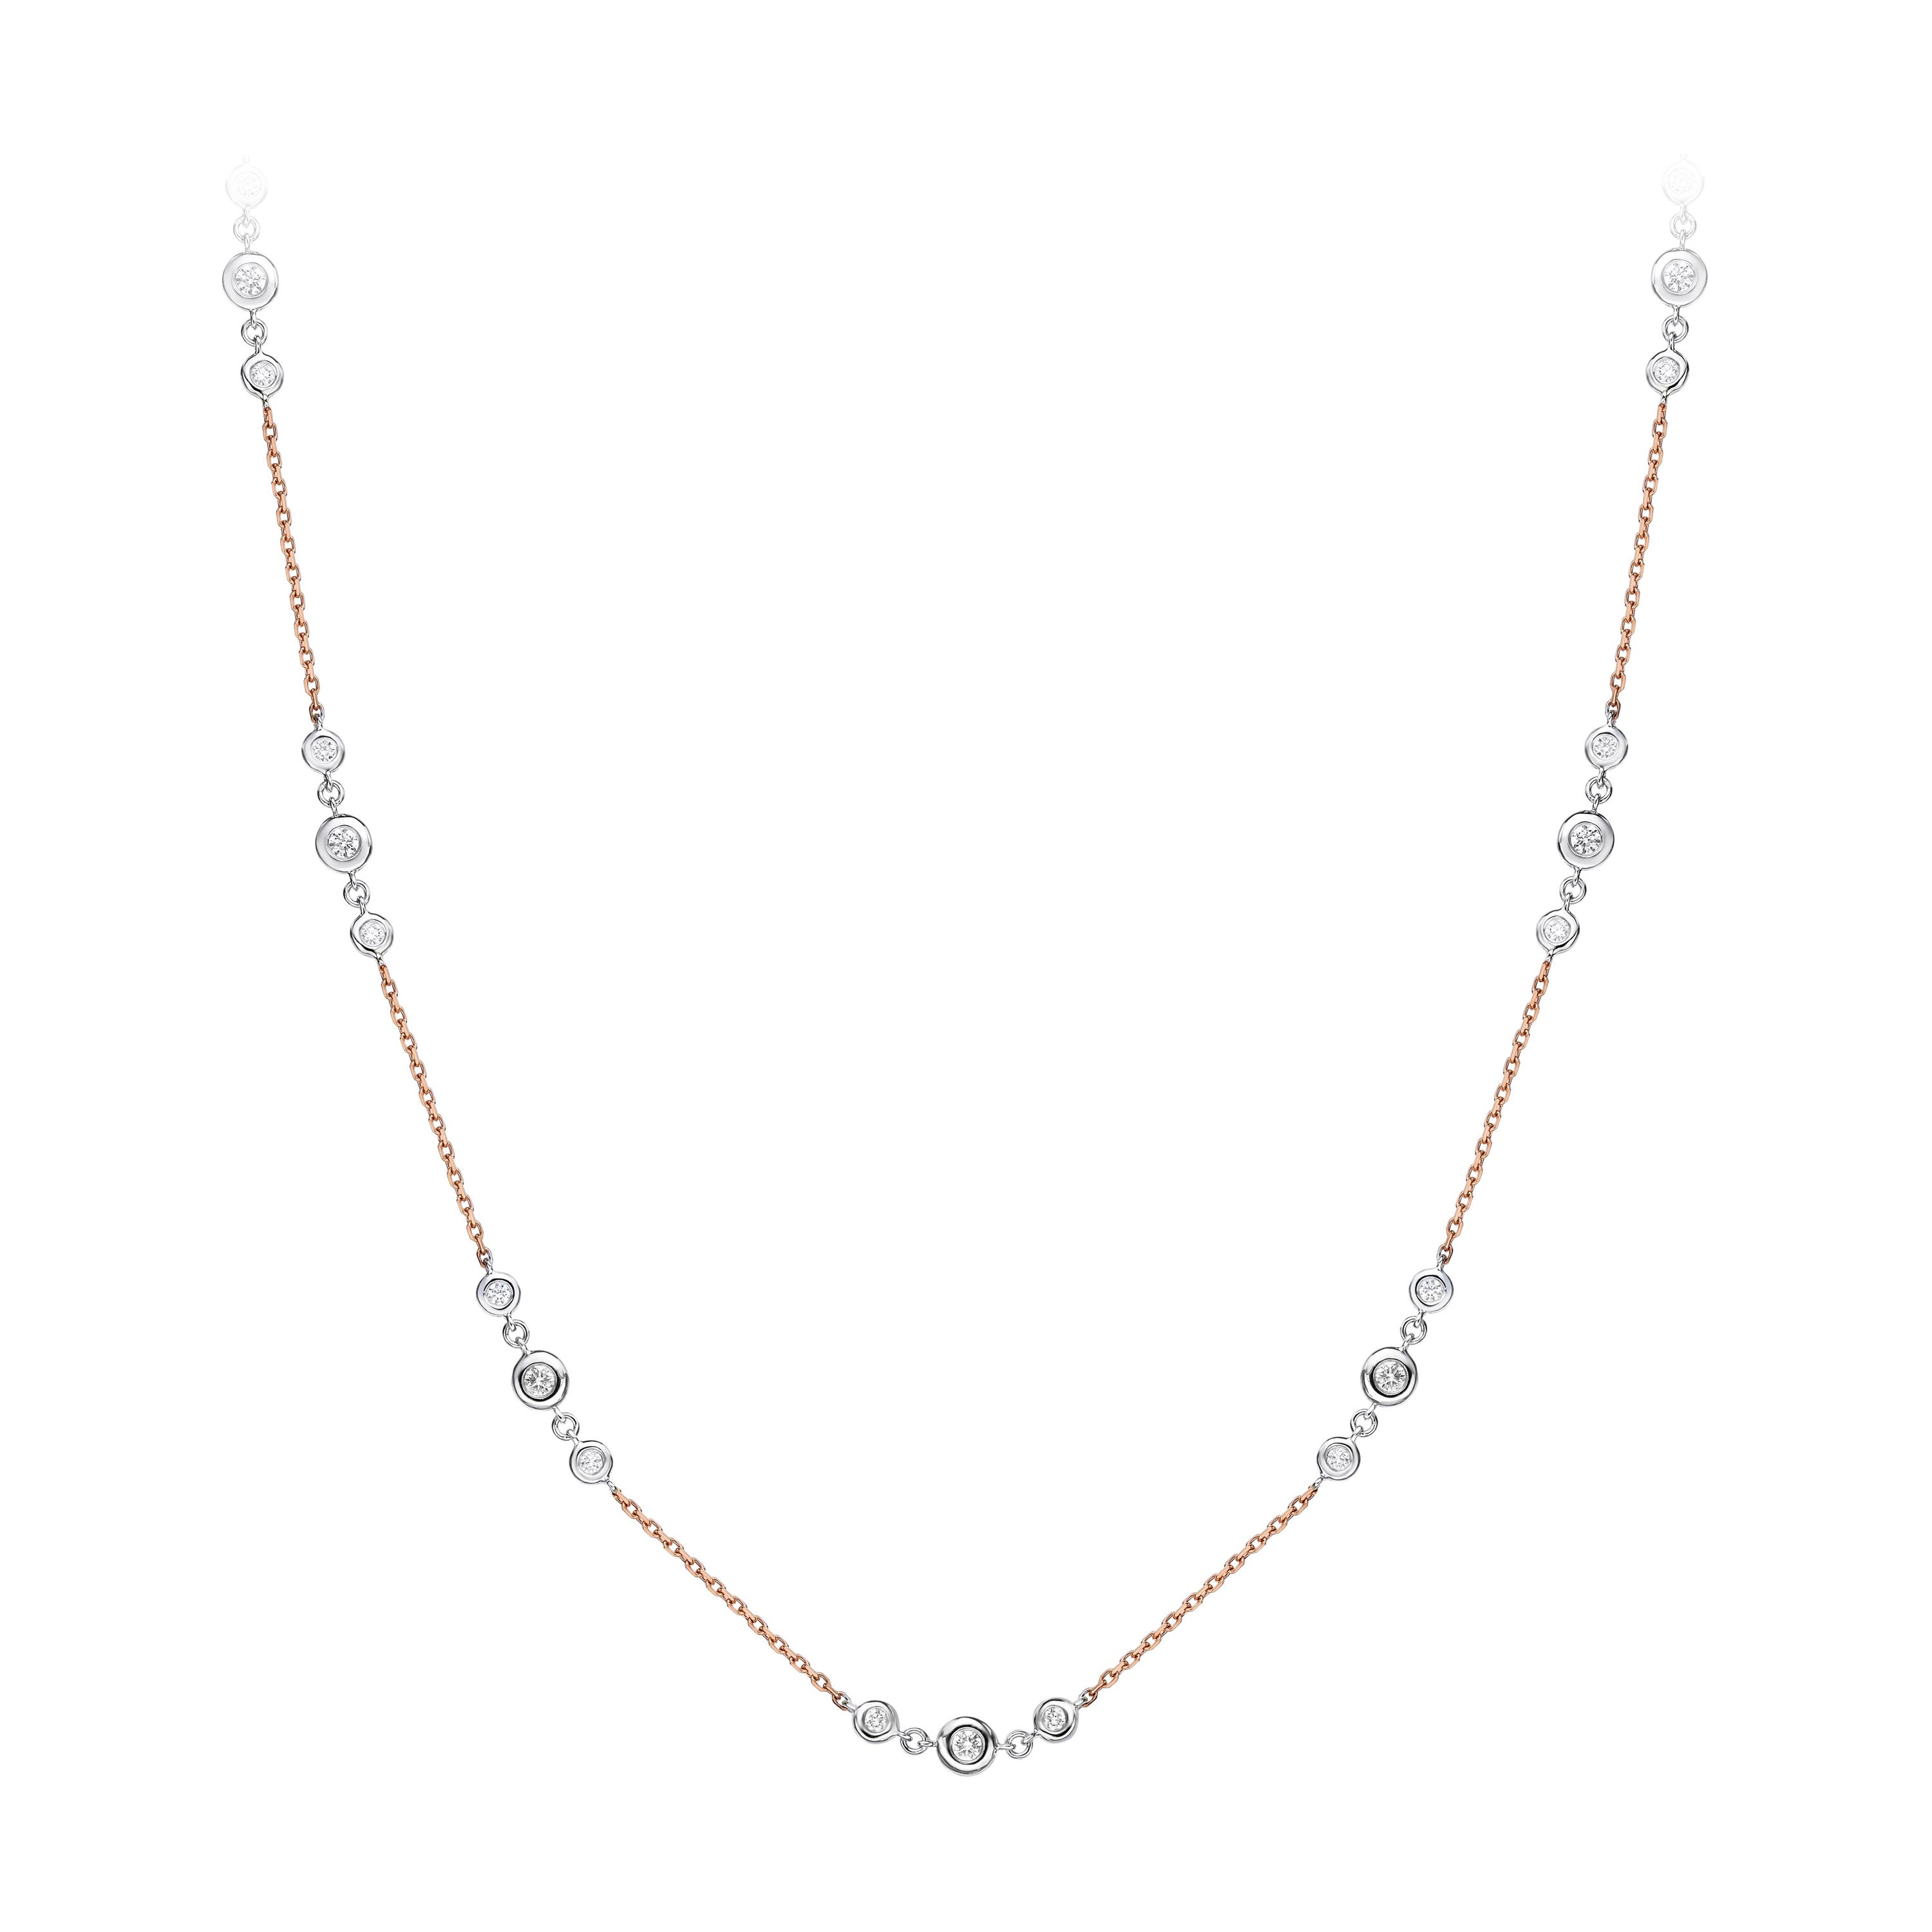 GILIN 18K White Rose Gold Diamond Necklace For Sale